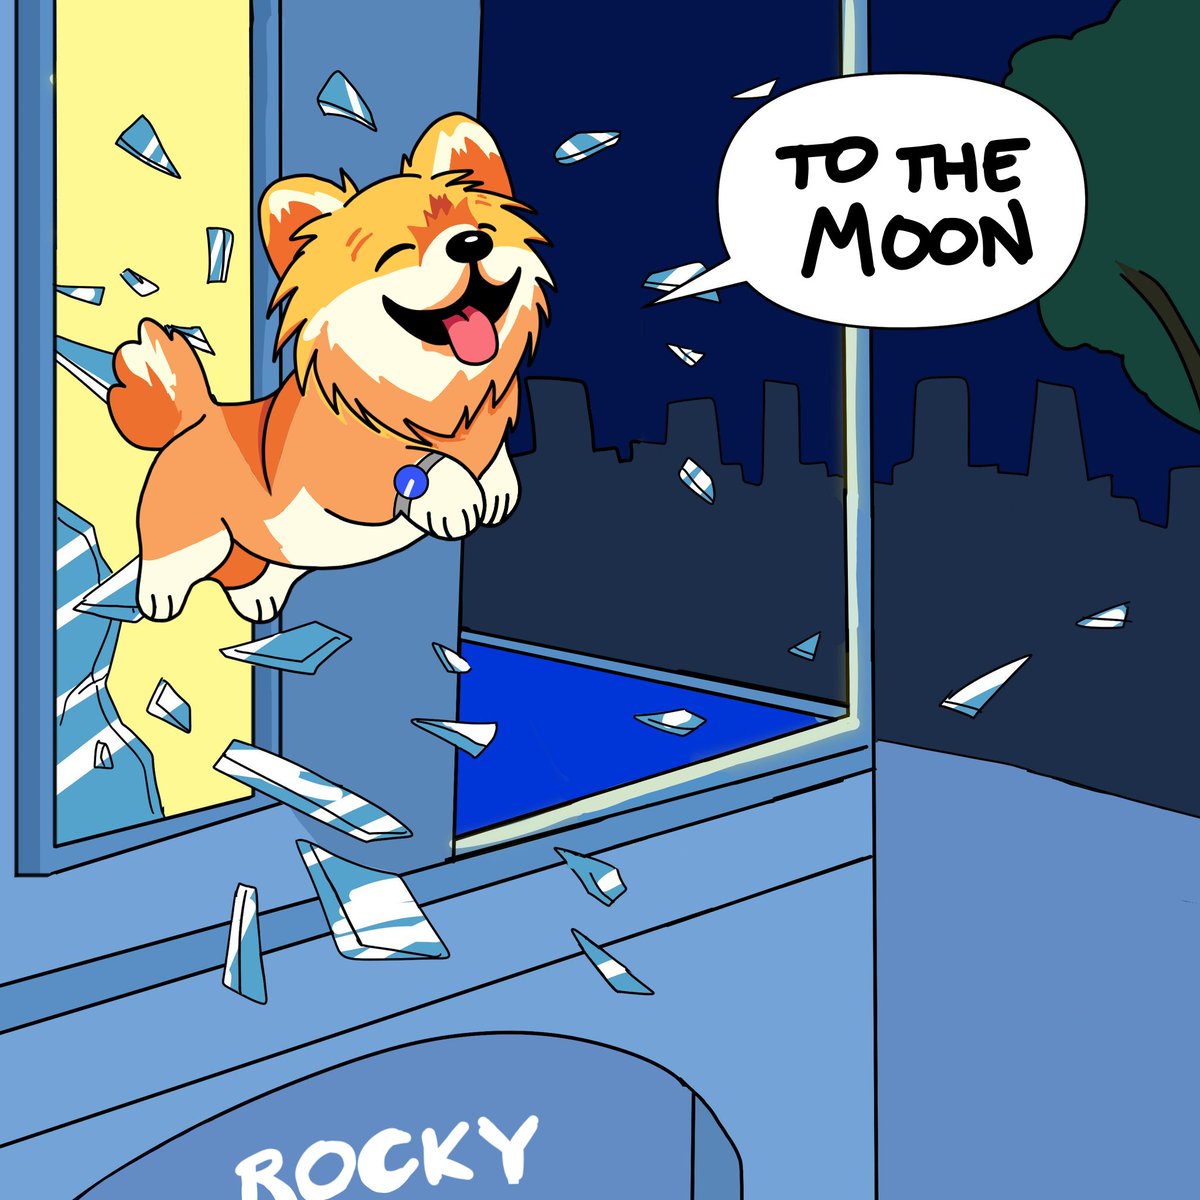 My $ROCKY meme entry...

Let's go and let's bring @RockyCoinBase the fluffy son of @Meta_Winners to the moon!
@Skelhorn #ROCKYMEMES

Drawn using Medibang Paint.